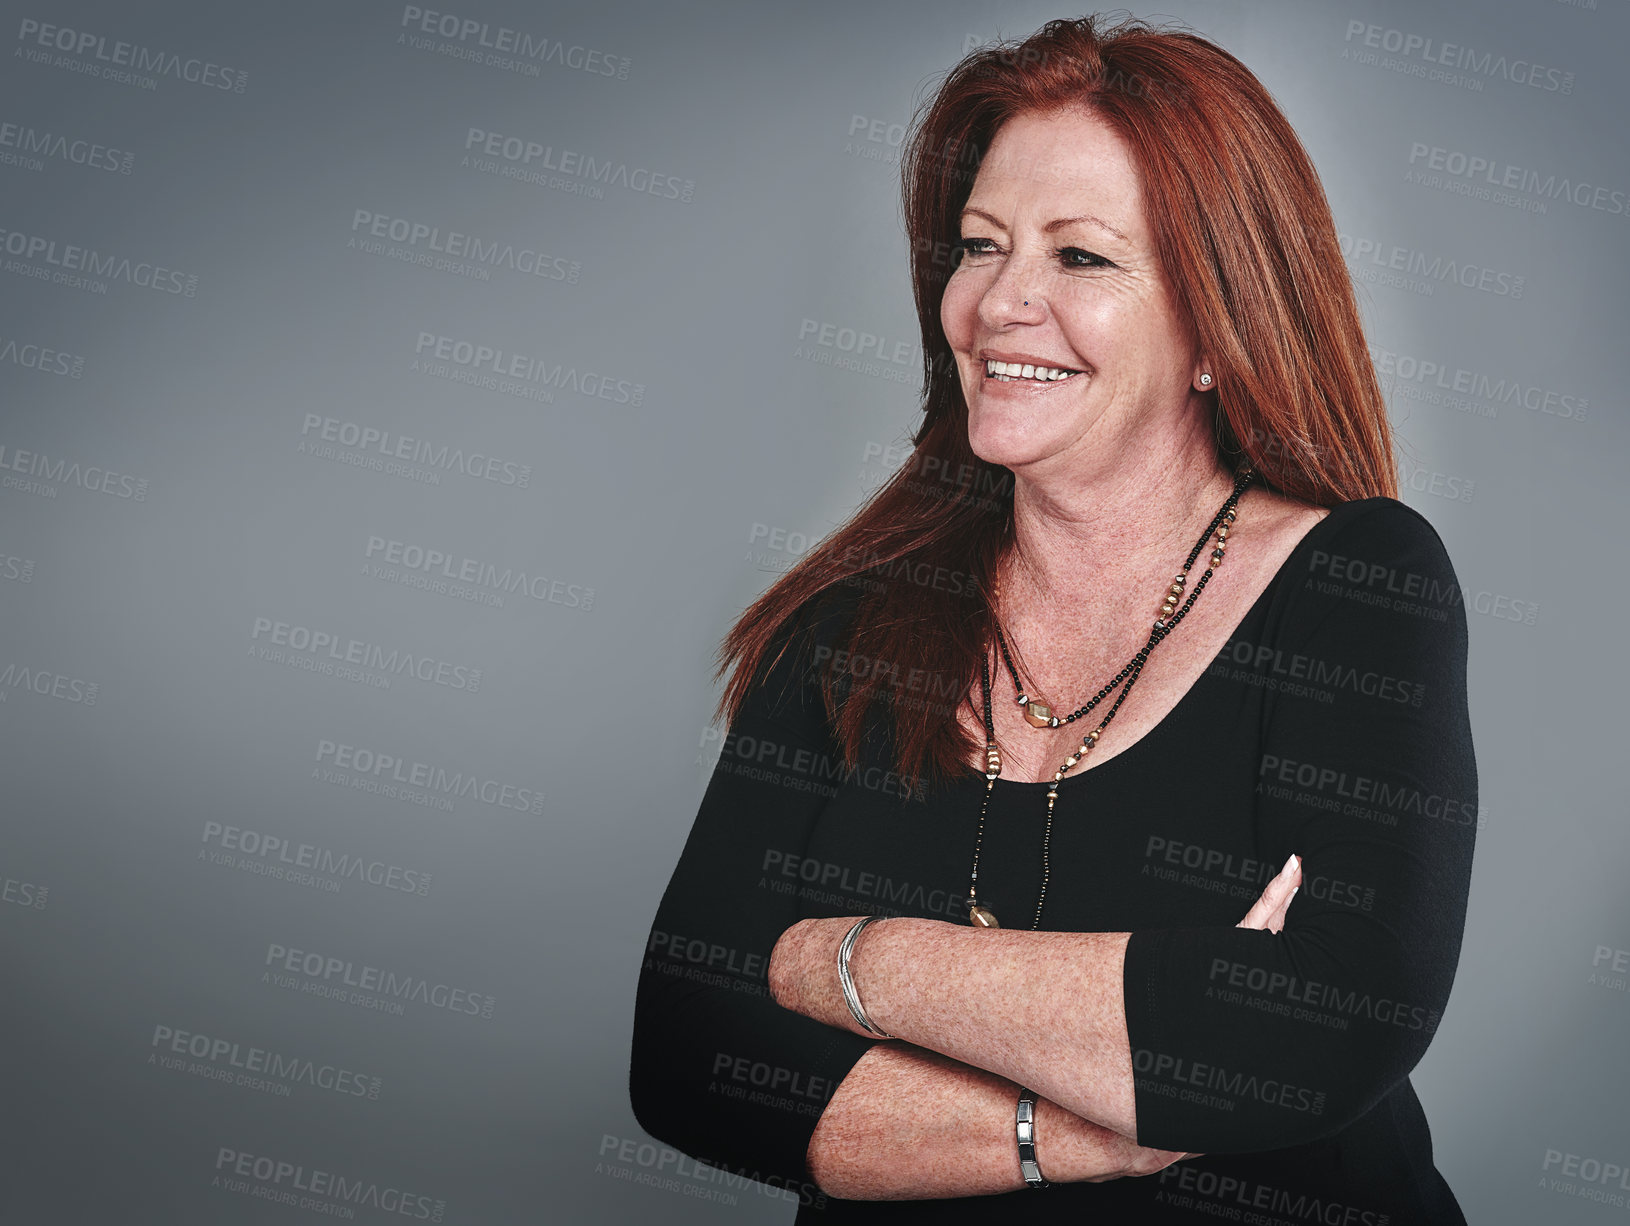 Buy stock photo Studio shot of a confident mature businesswoman posing against a grey background